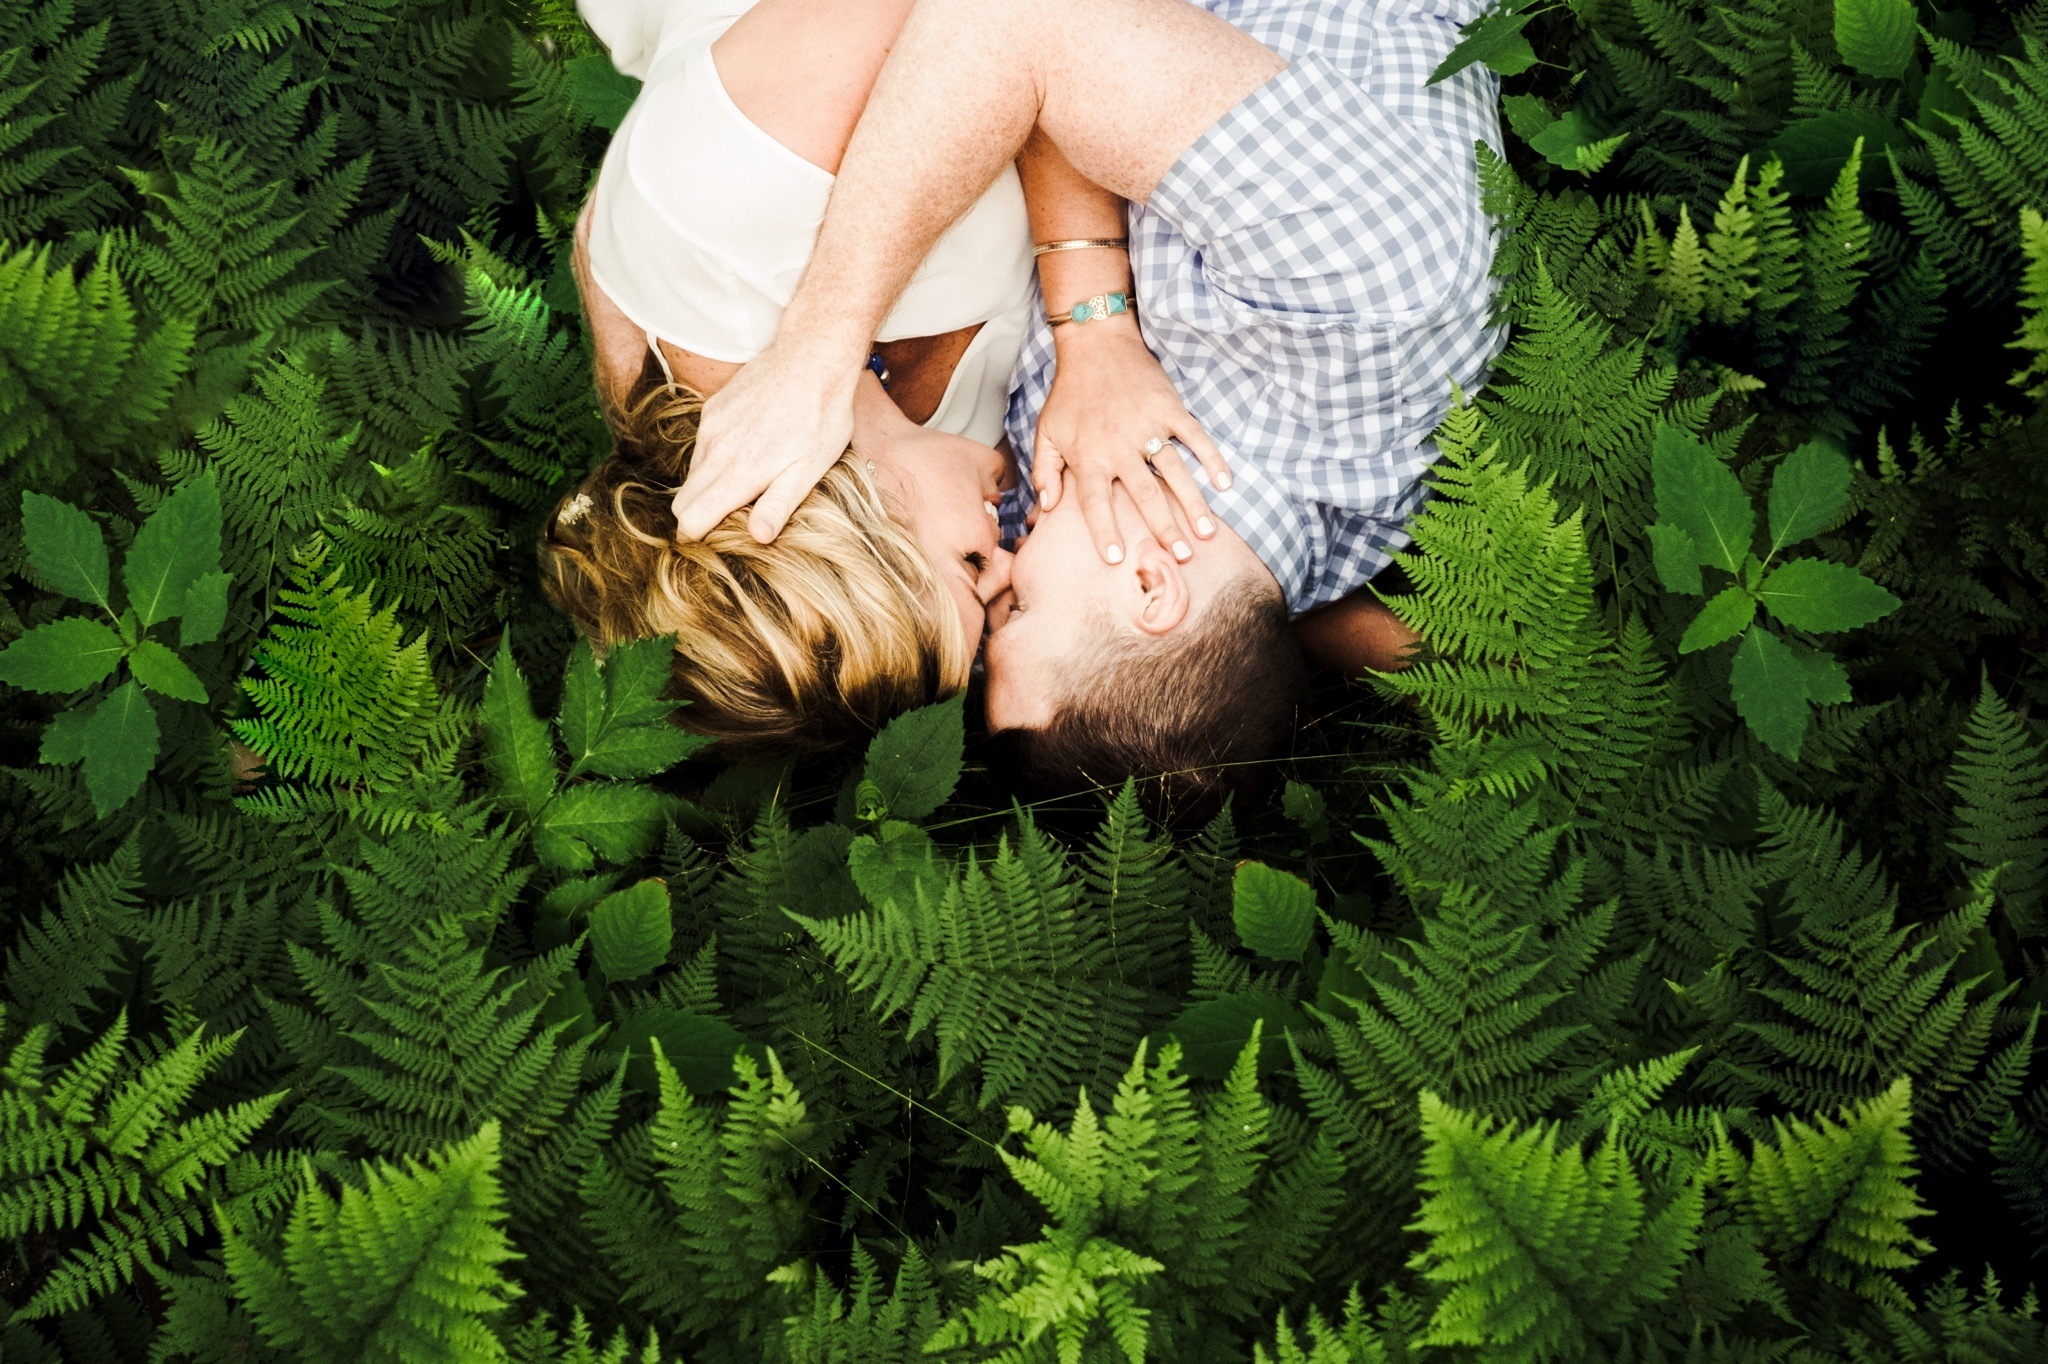 Sweet and passionate couple embracing and about to kiss while laying in the fern during their Craggy Gardens Engagement Session